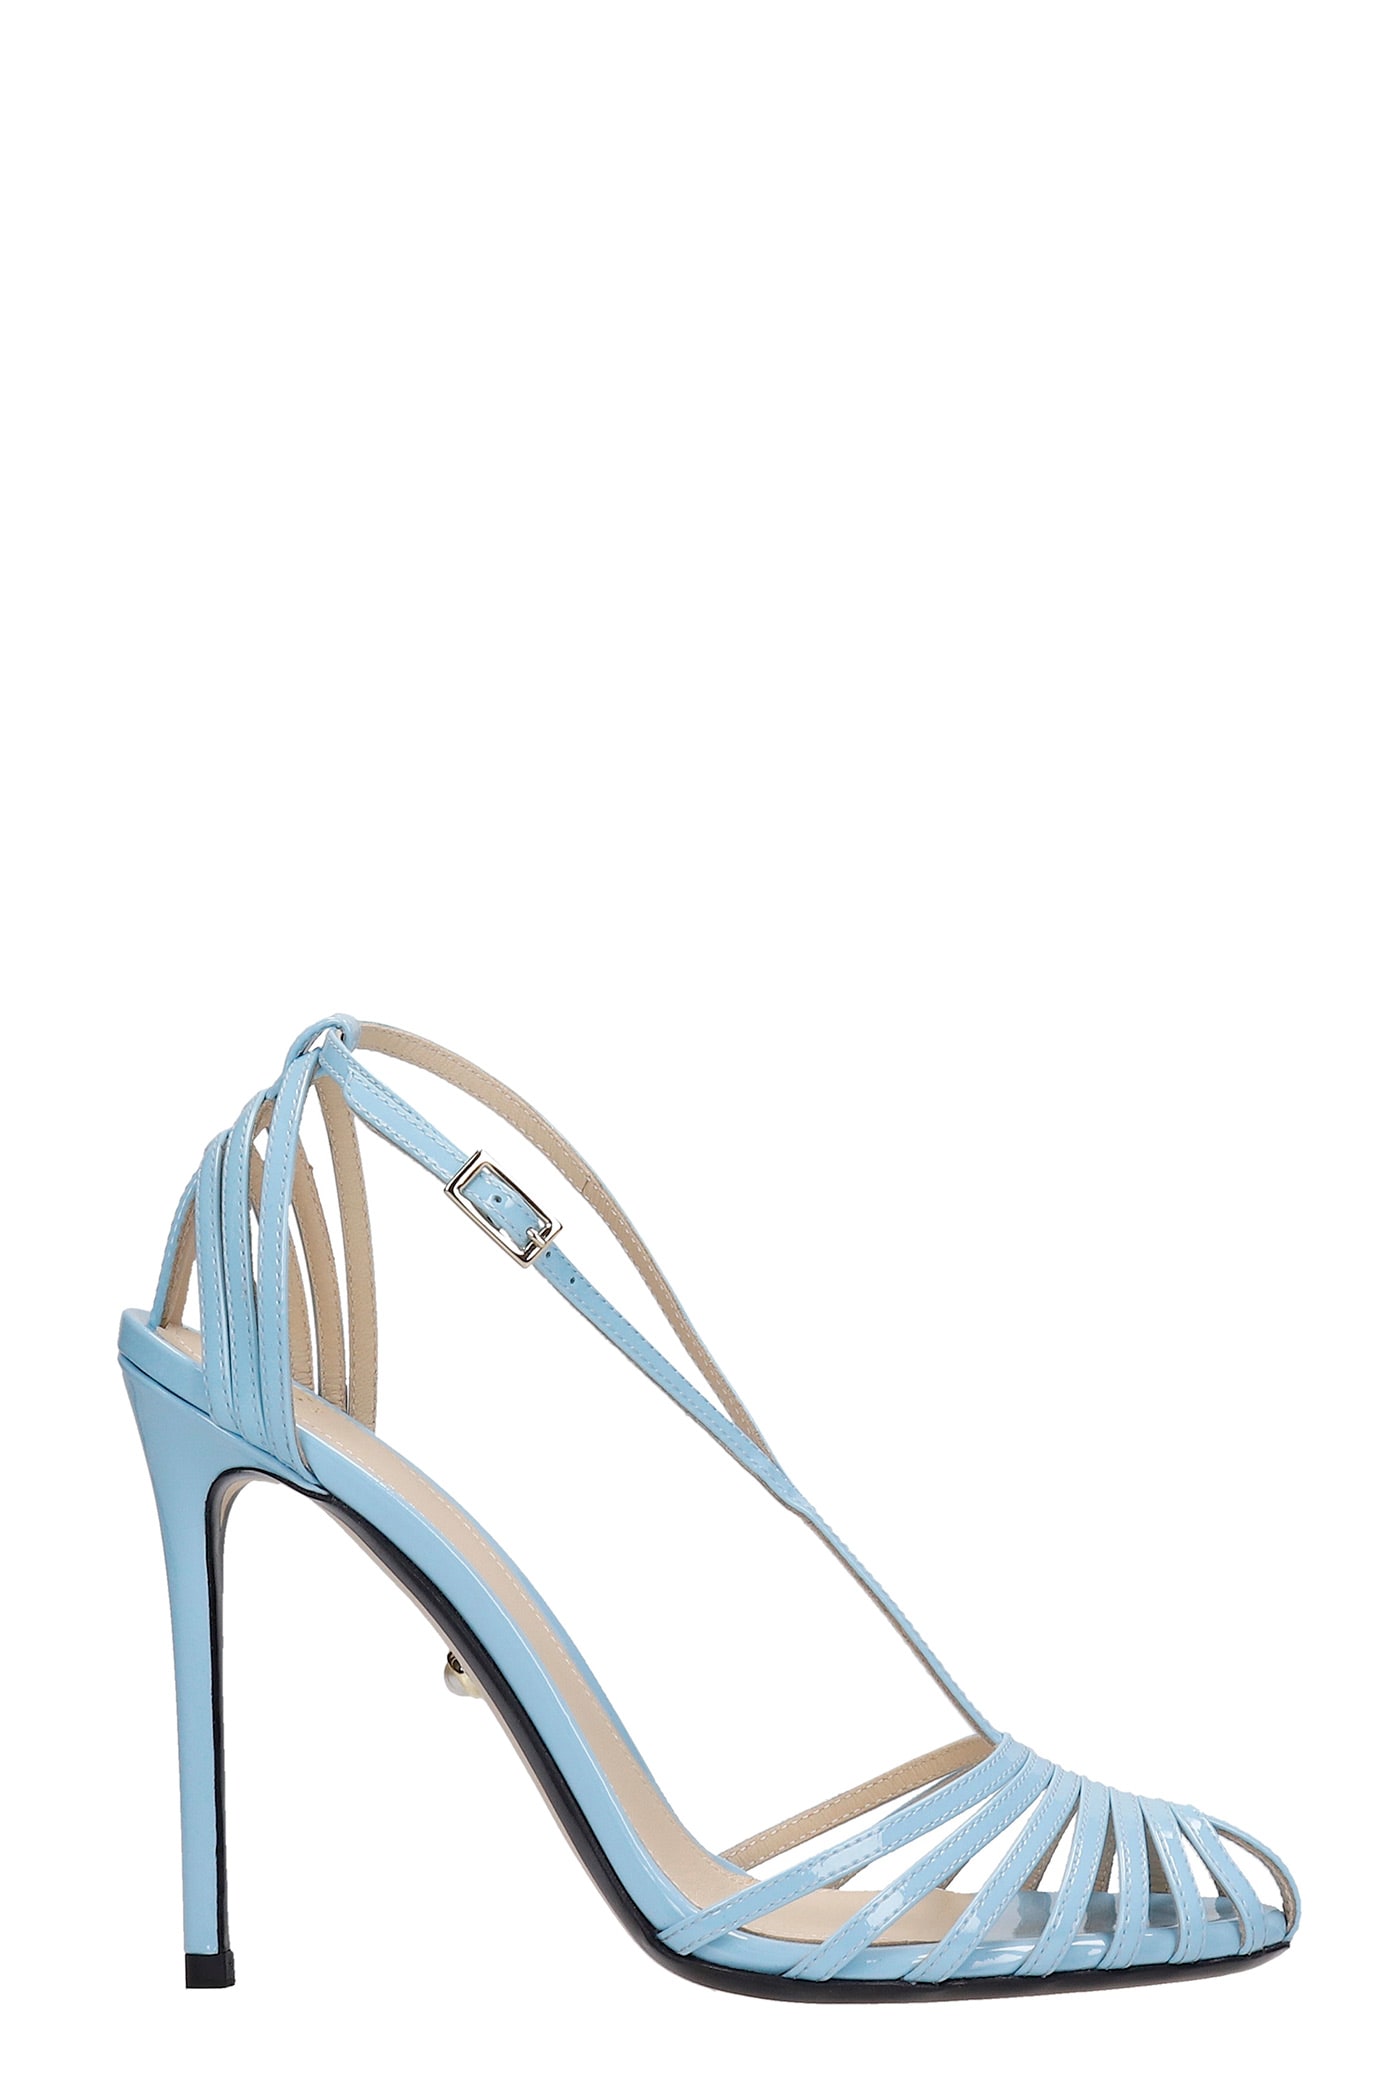 Alevì Toni 110 Sandals In Cyan Patent Leather